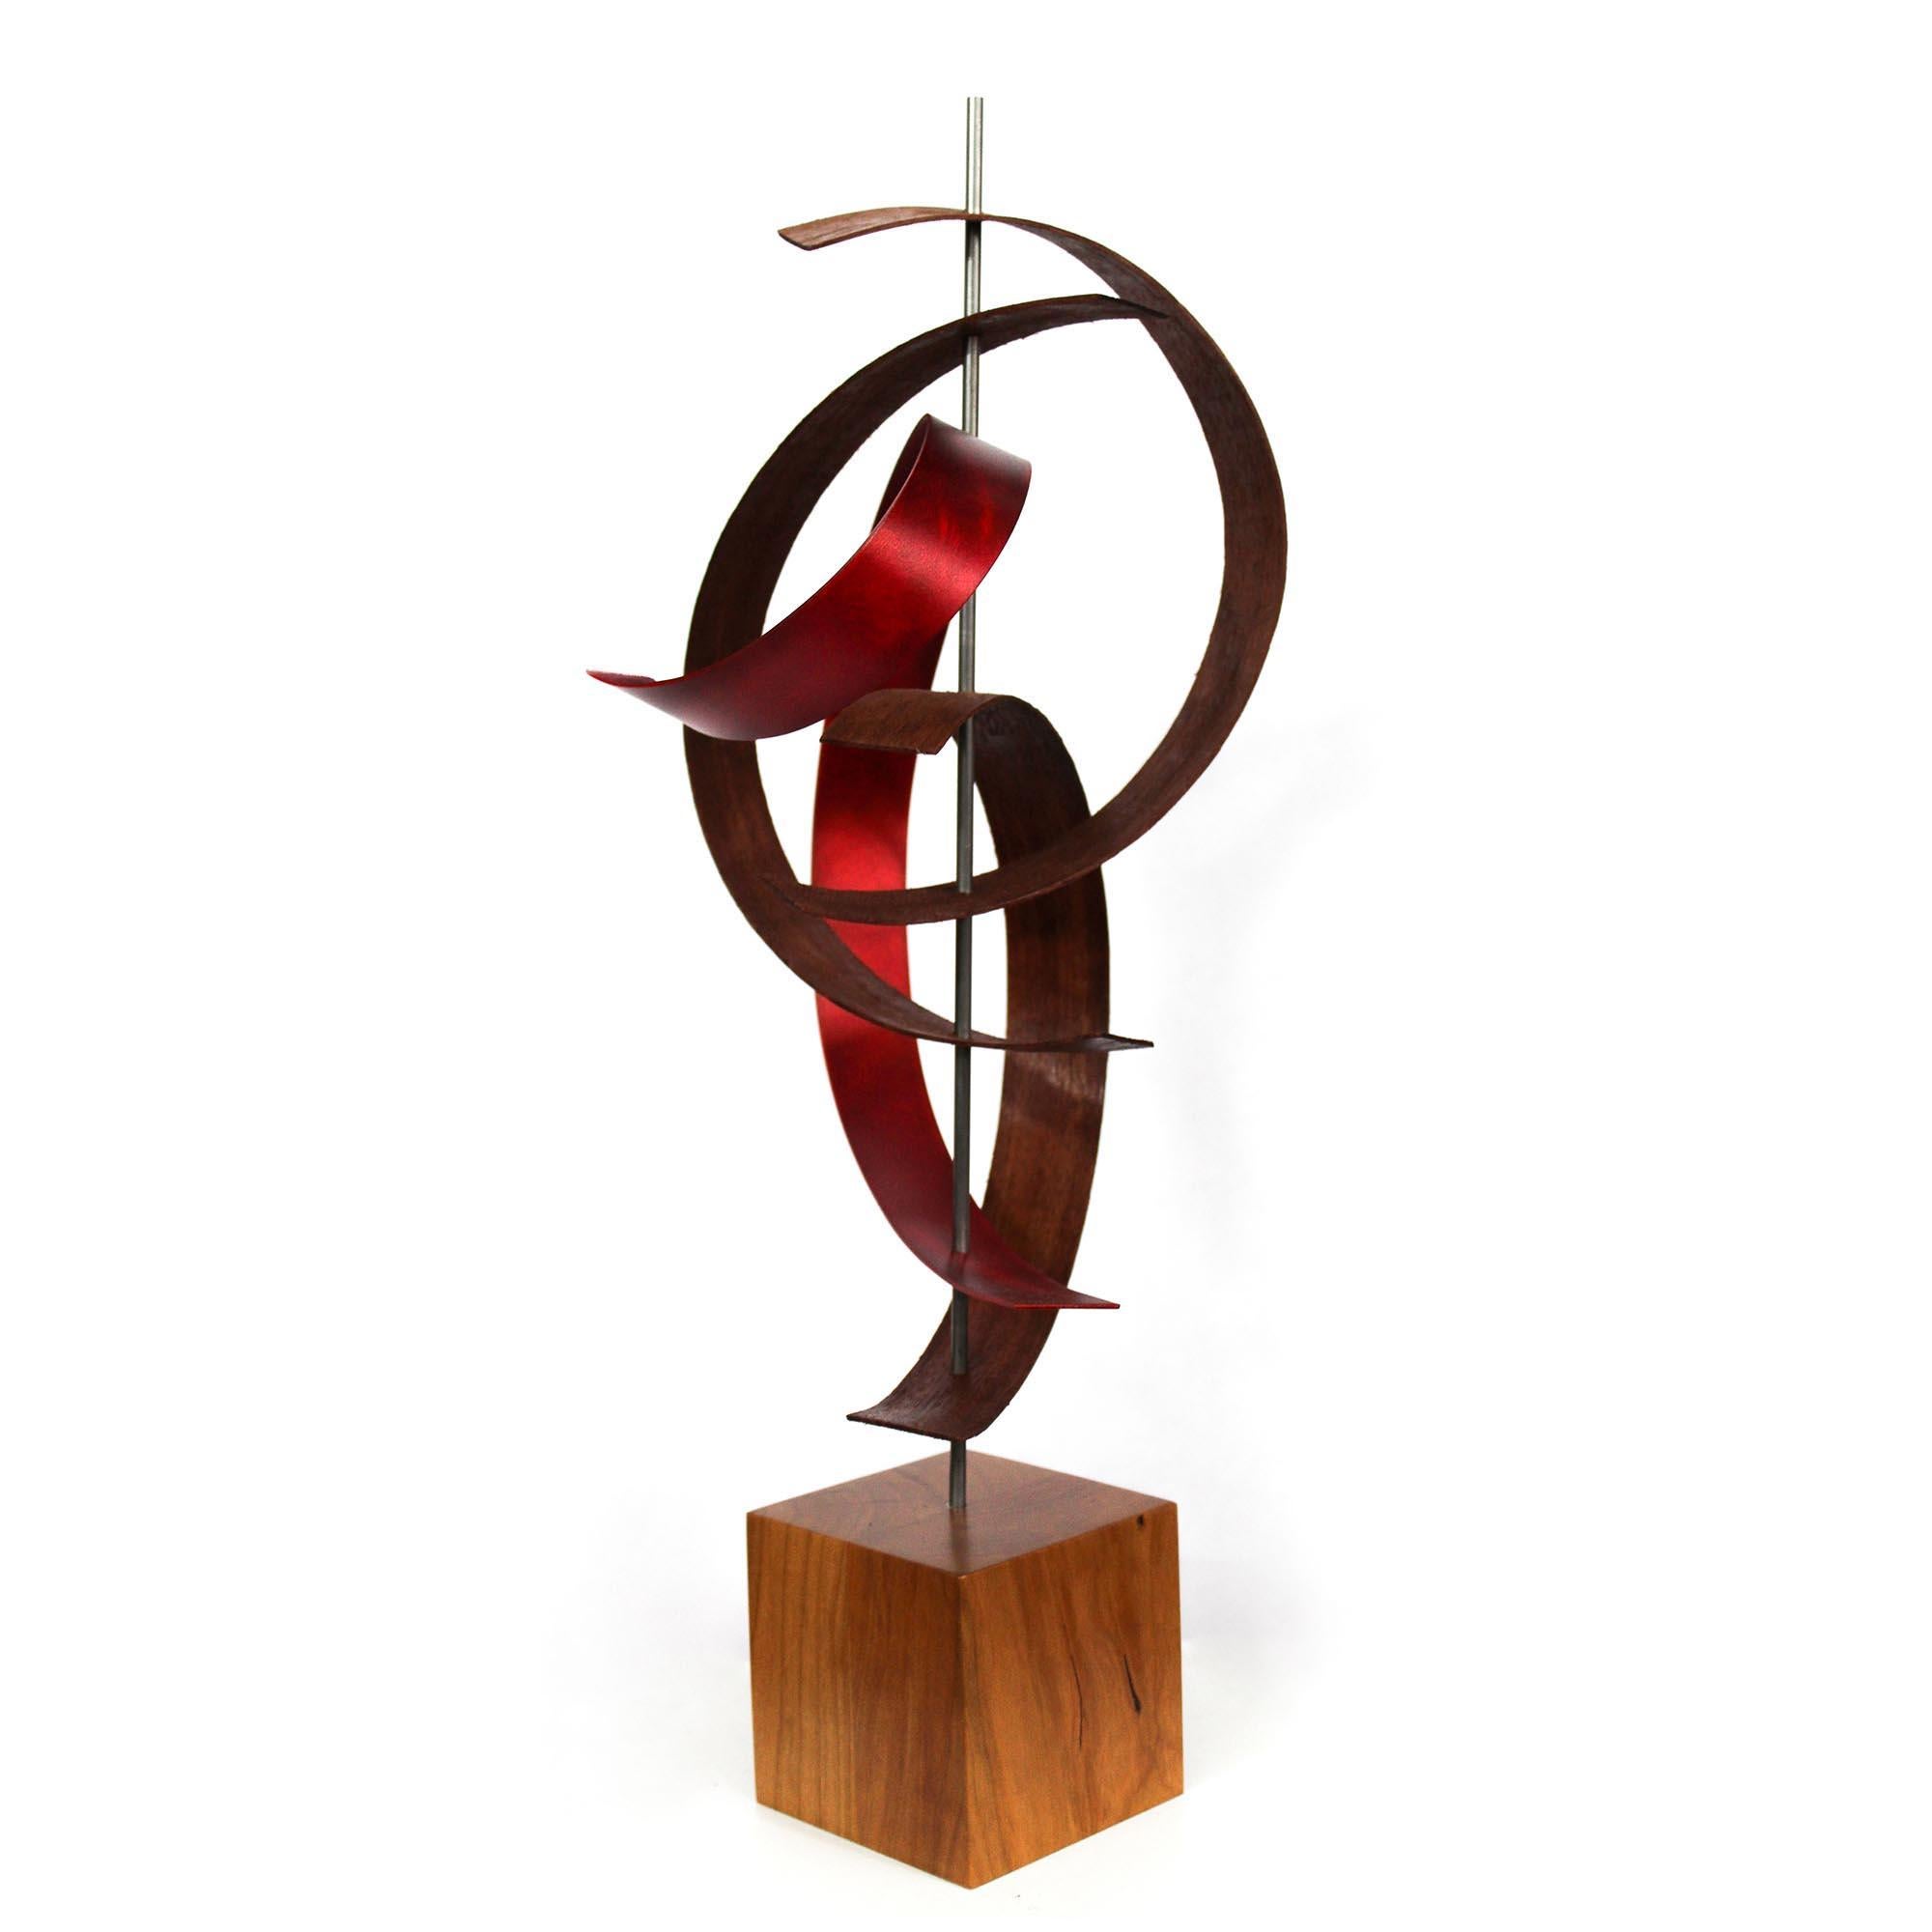 Contemporary Wood Metal Sculpture Art, Mid-Century Modern Inspired, by Jeff L. 2